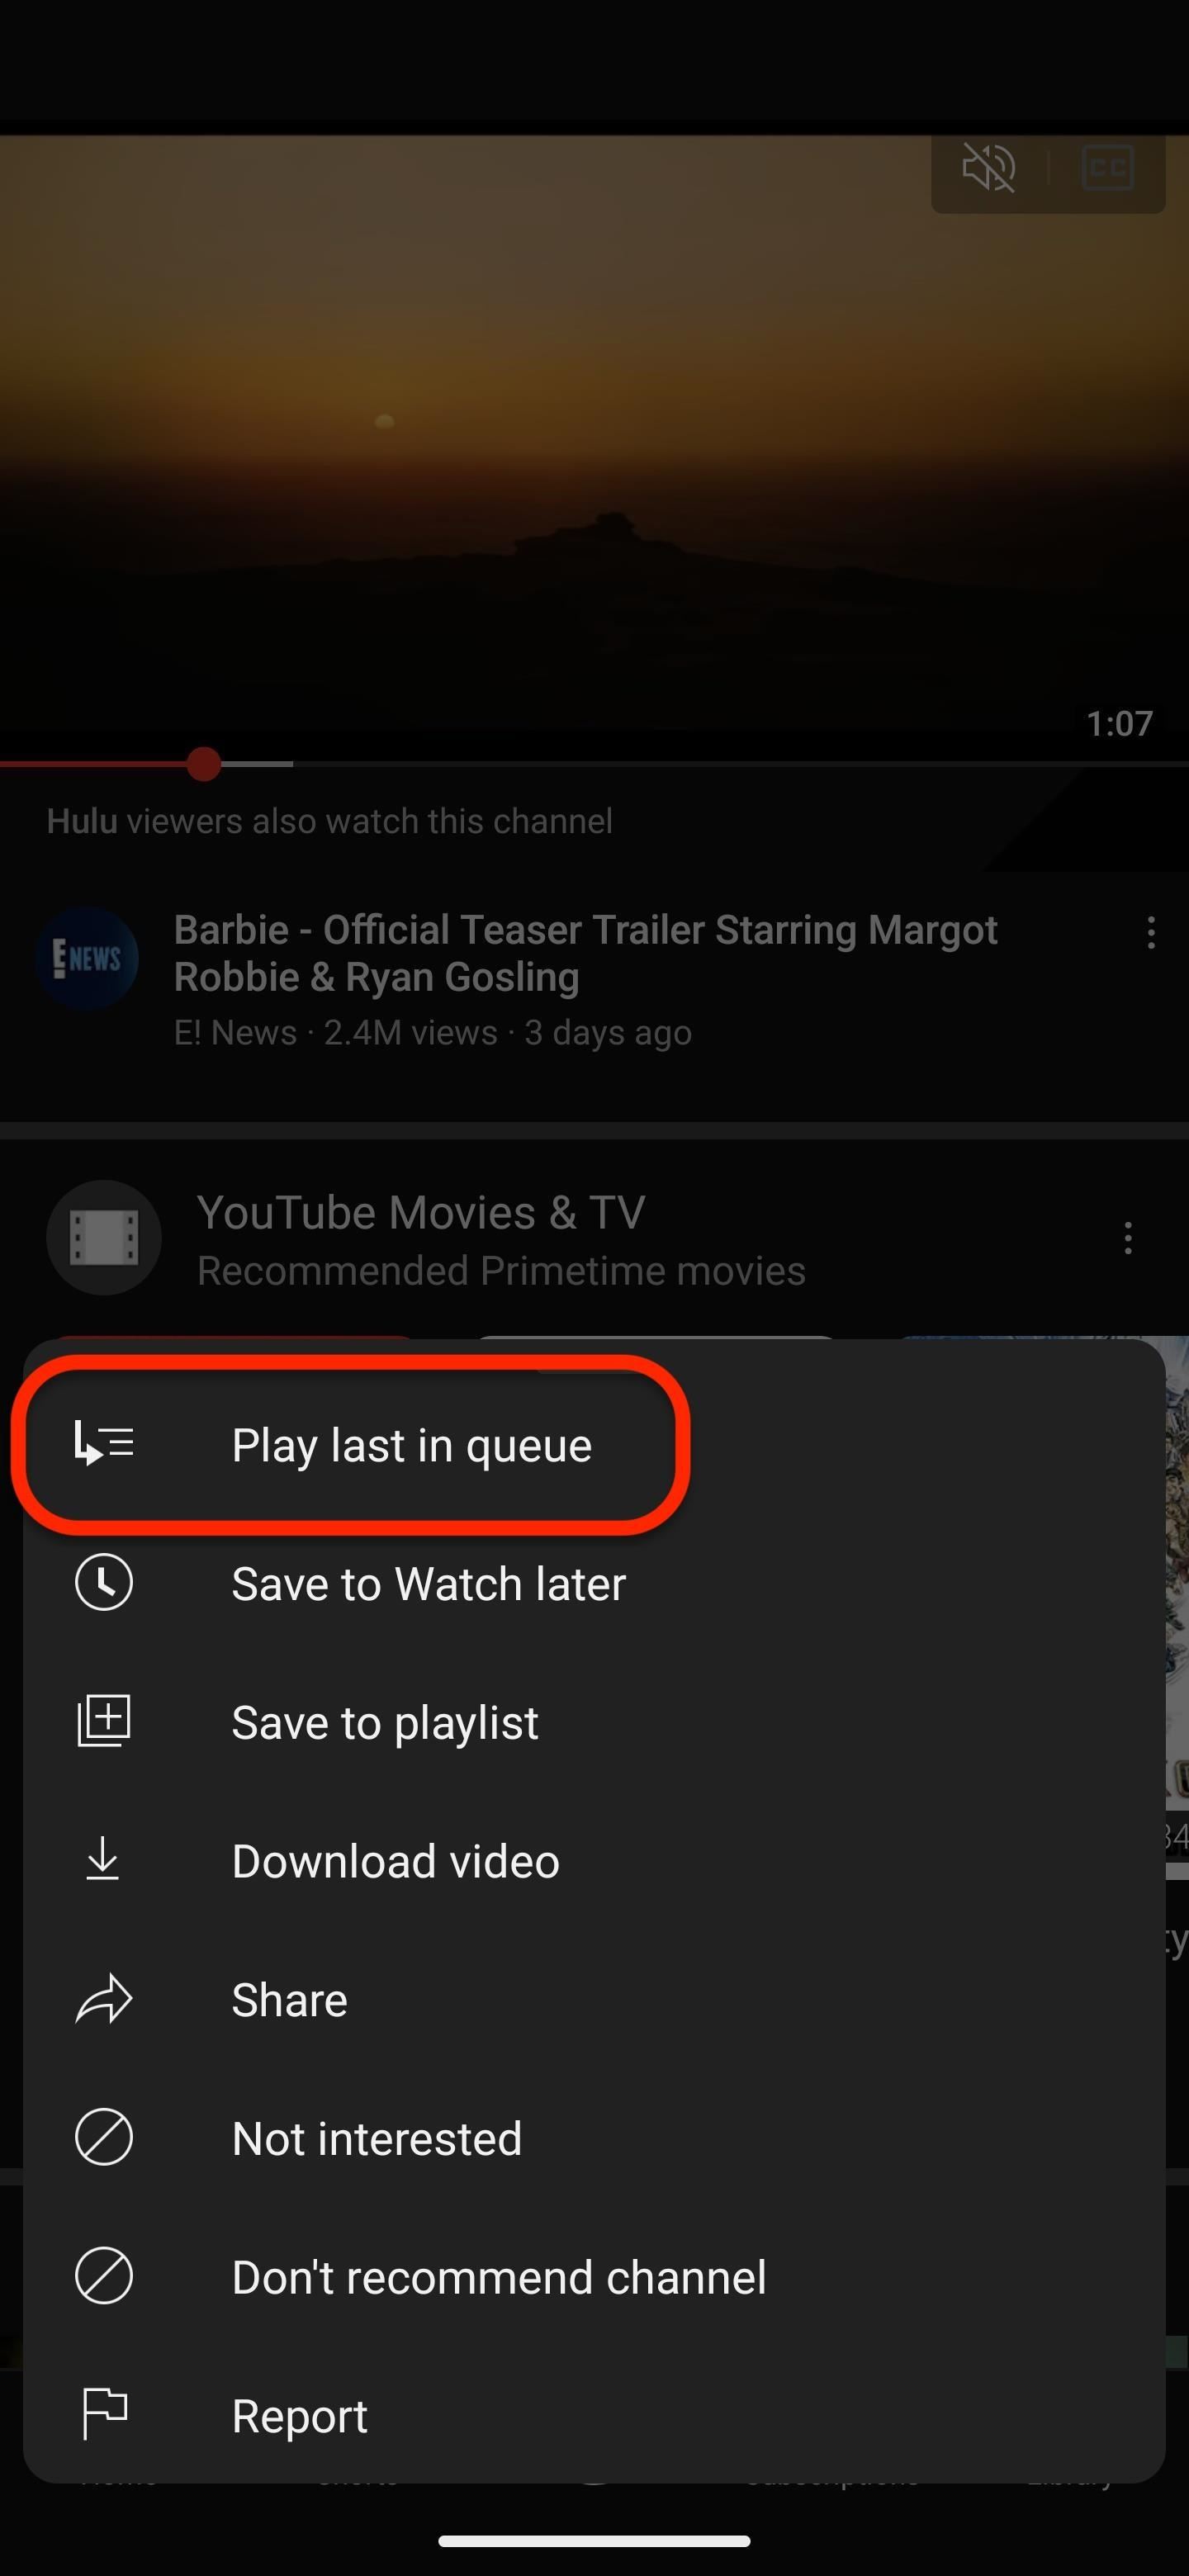 How to queue up new YouTube videos on your mobile device